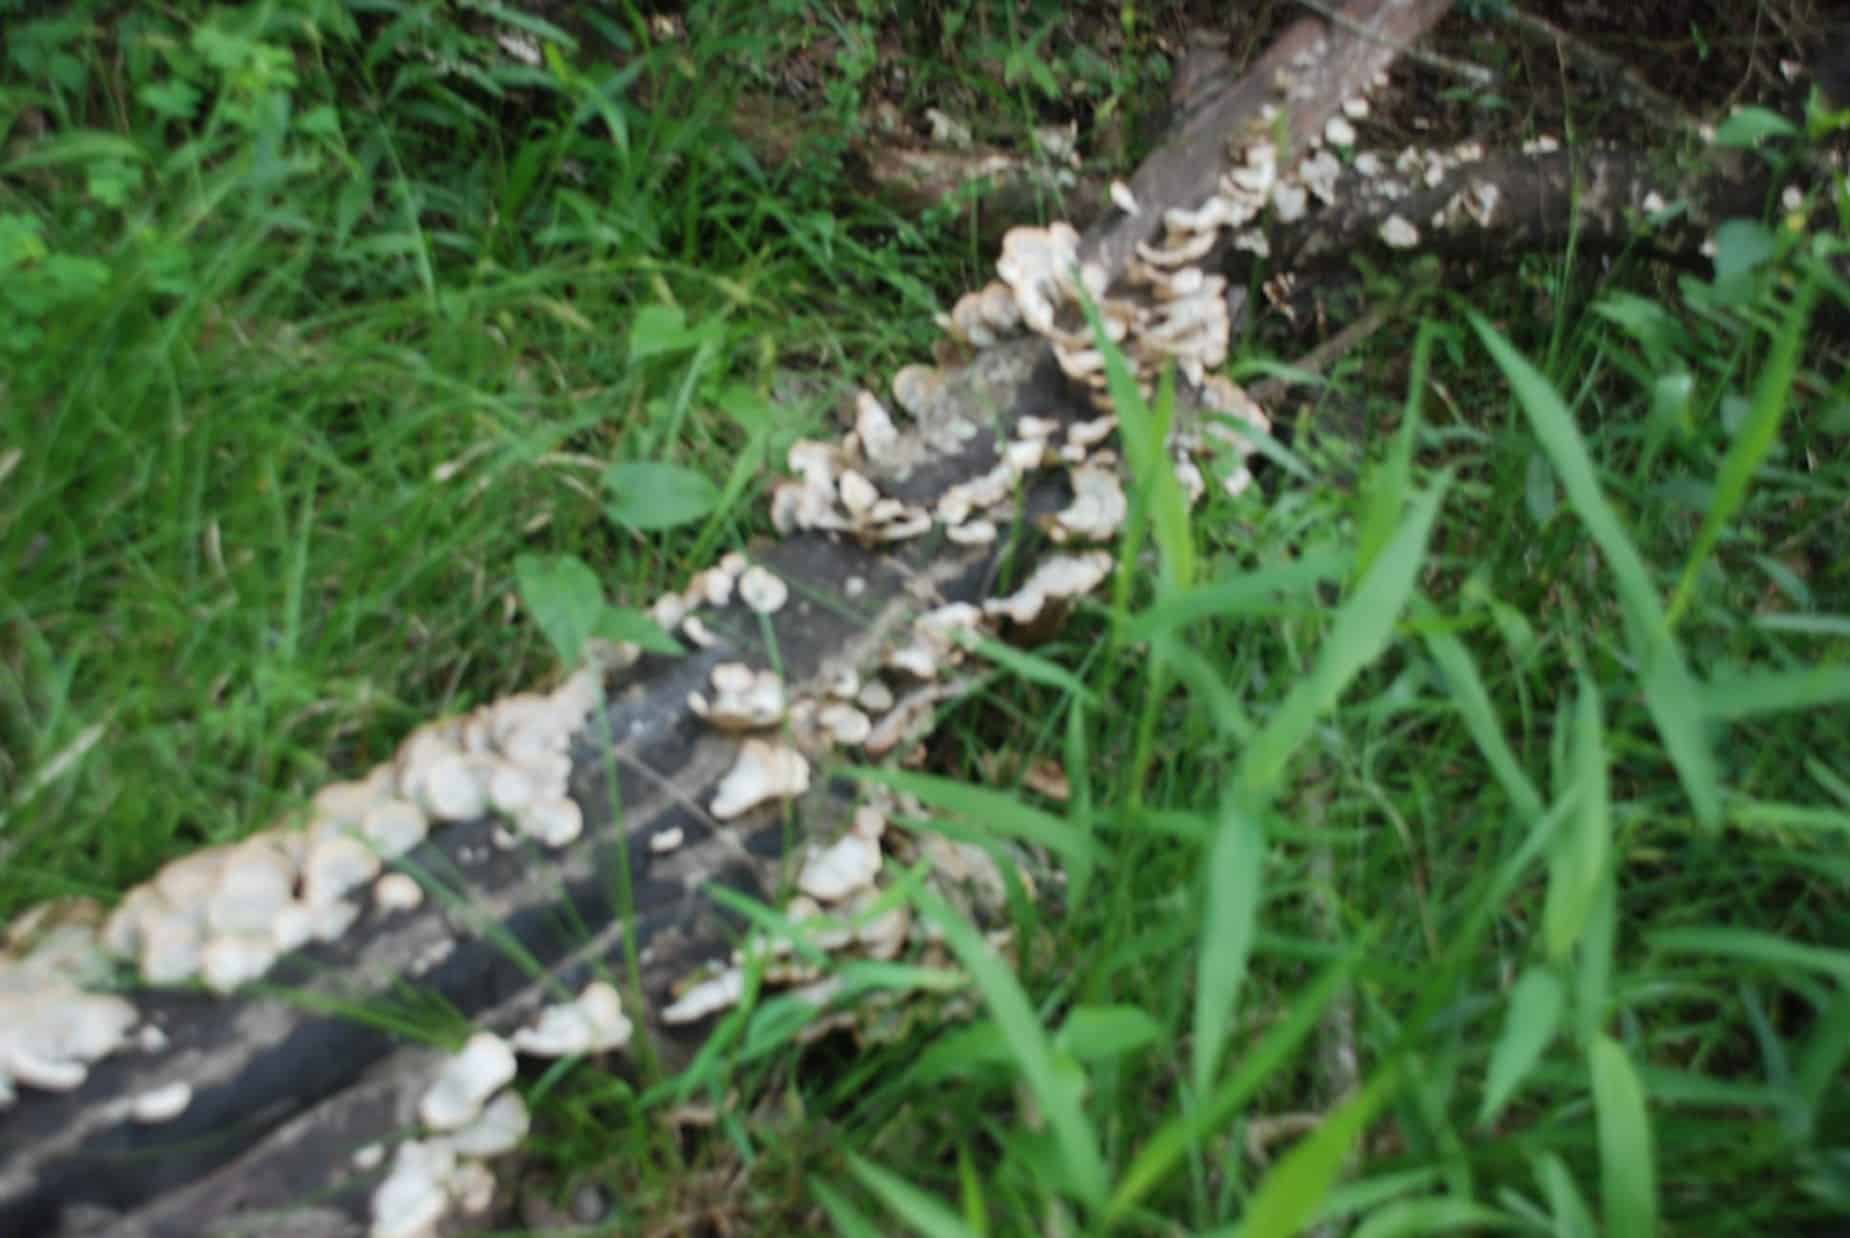 Fallen Limb with Fungi growth along dirt path in 100 Acre Wood Preserve Houston TX